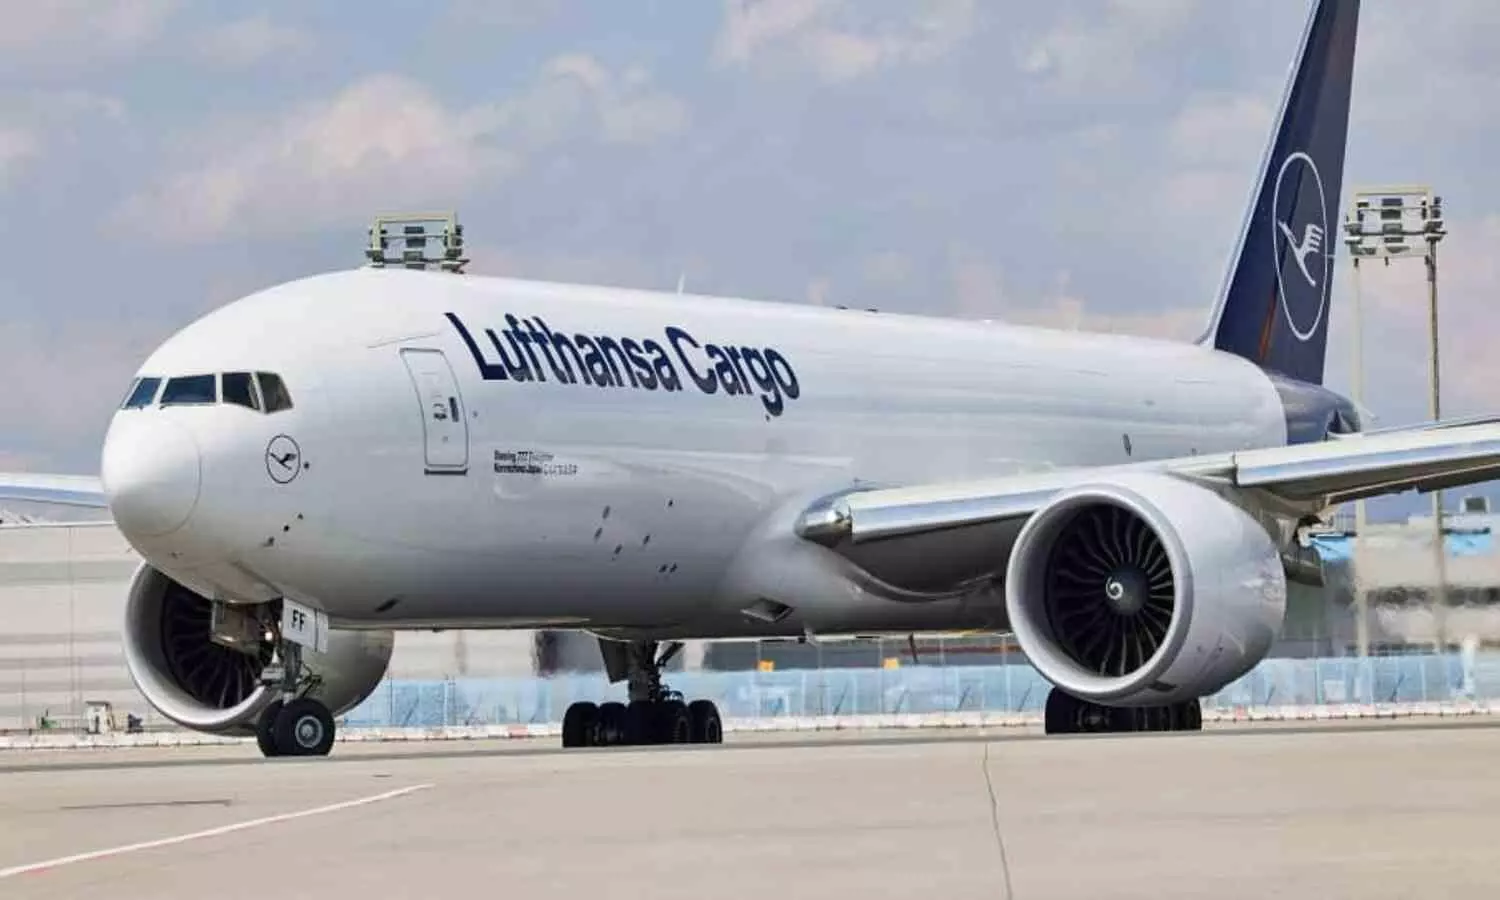 Lufthansa Cargo is first cargo airline to use environment-friendly plastic film for transportation